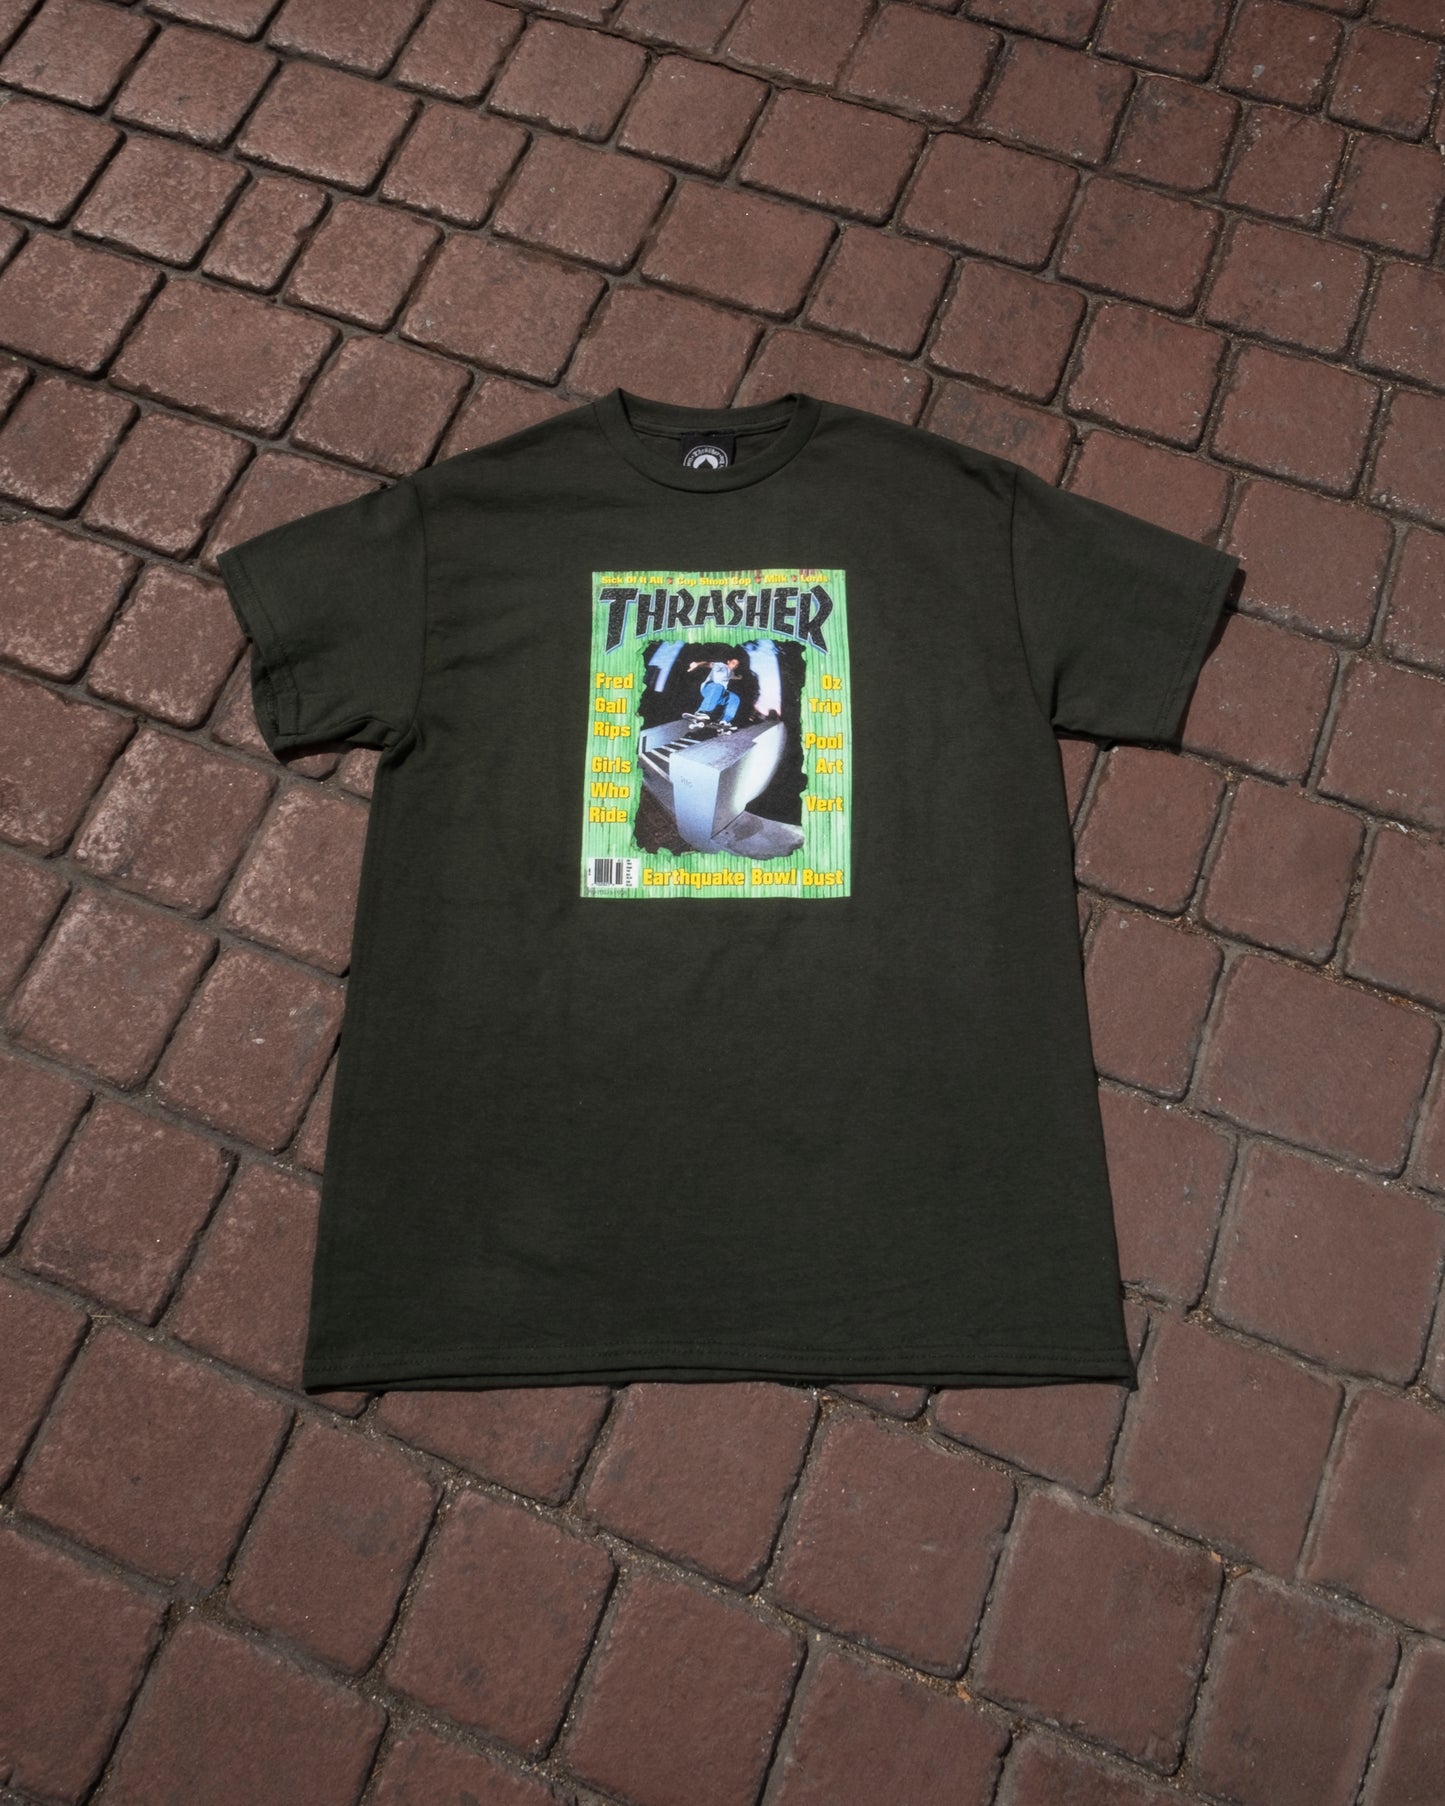 Fred Gall 95 Cover s/s tee Shirt Dk. Grn(size options listed)